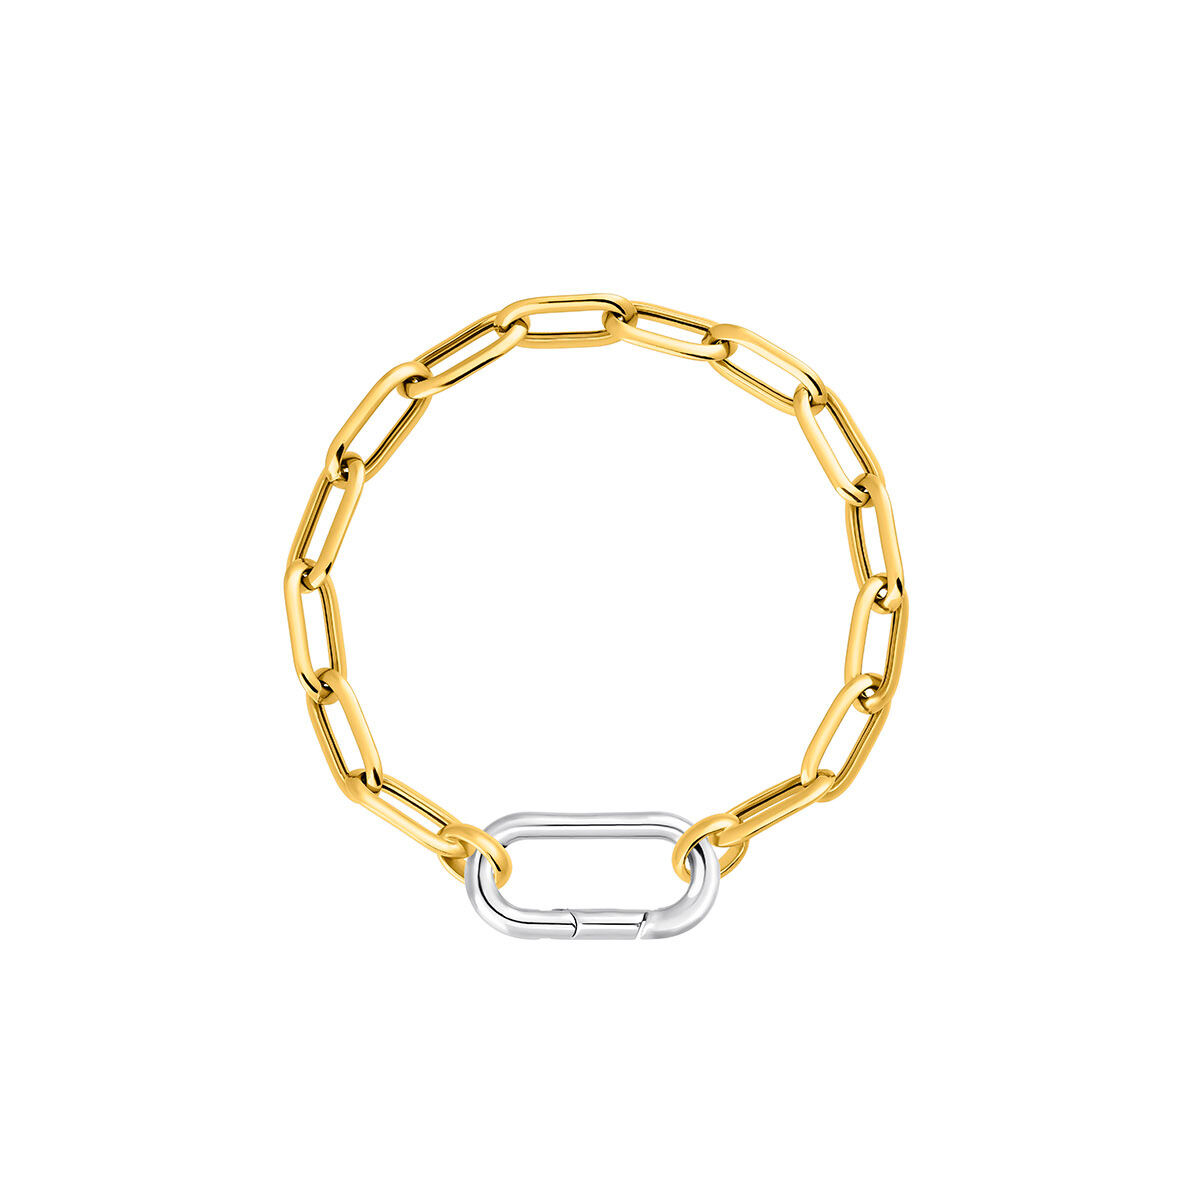 Silver rectangular cable link chain bracelet in 18k yellow gold-plated silver, J05340-02-16, hi-res